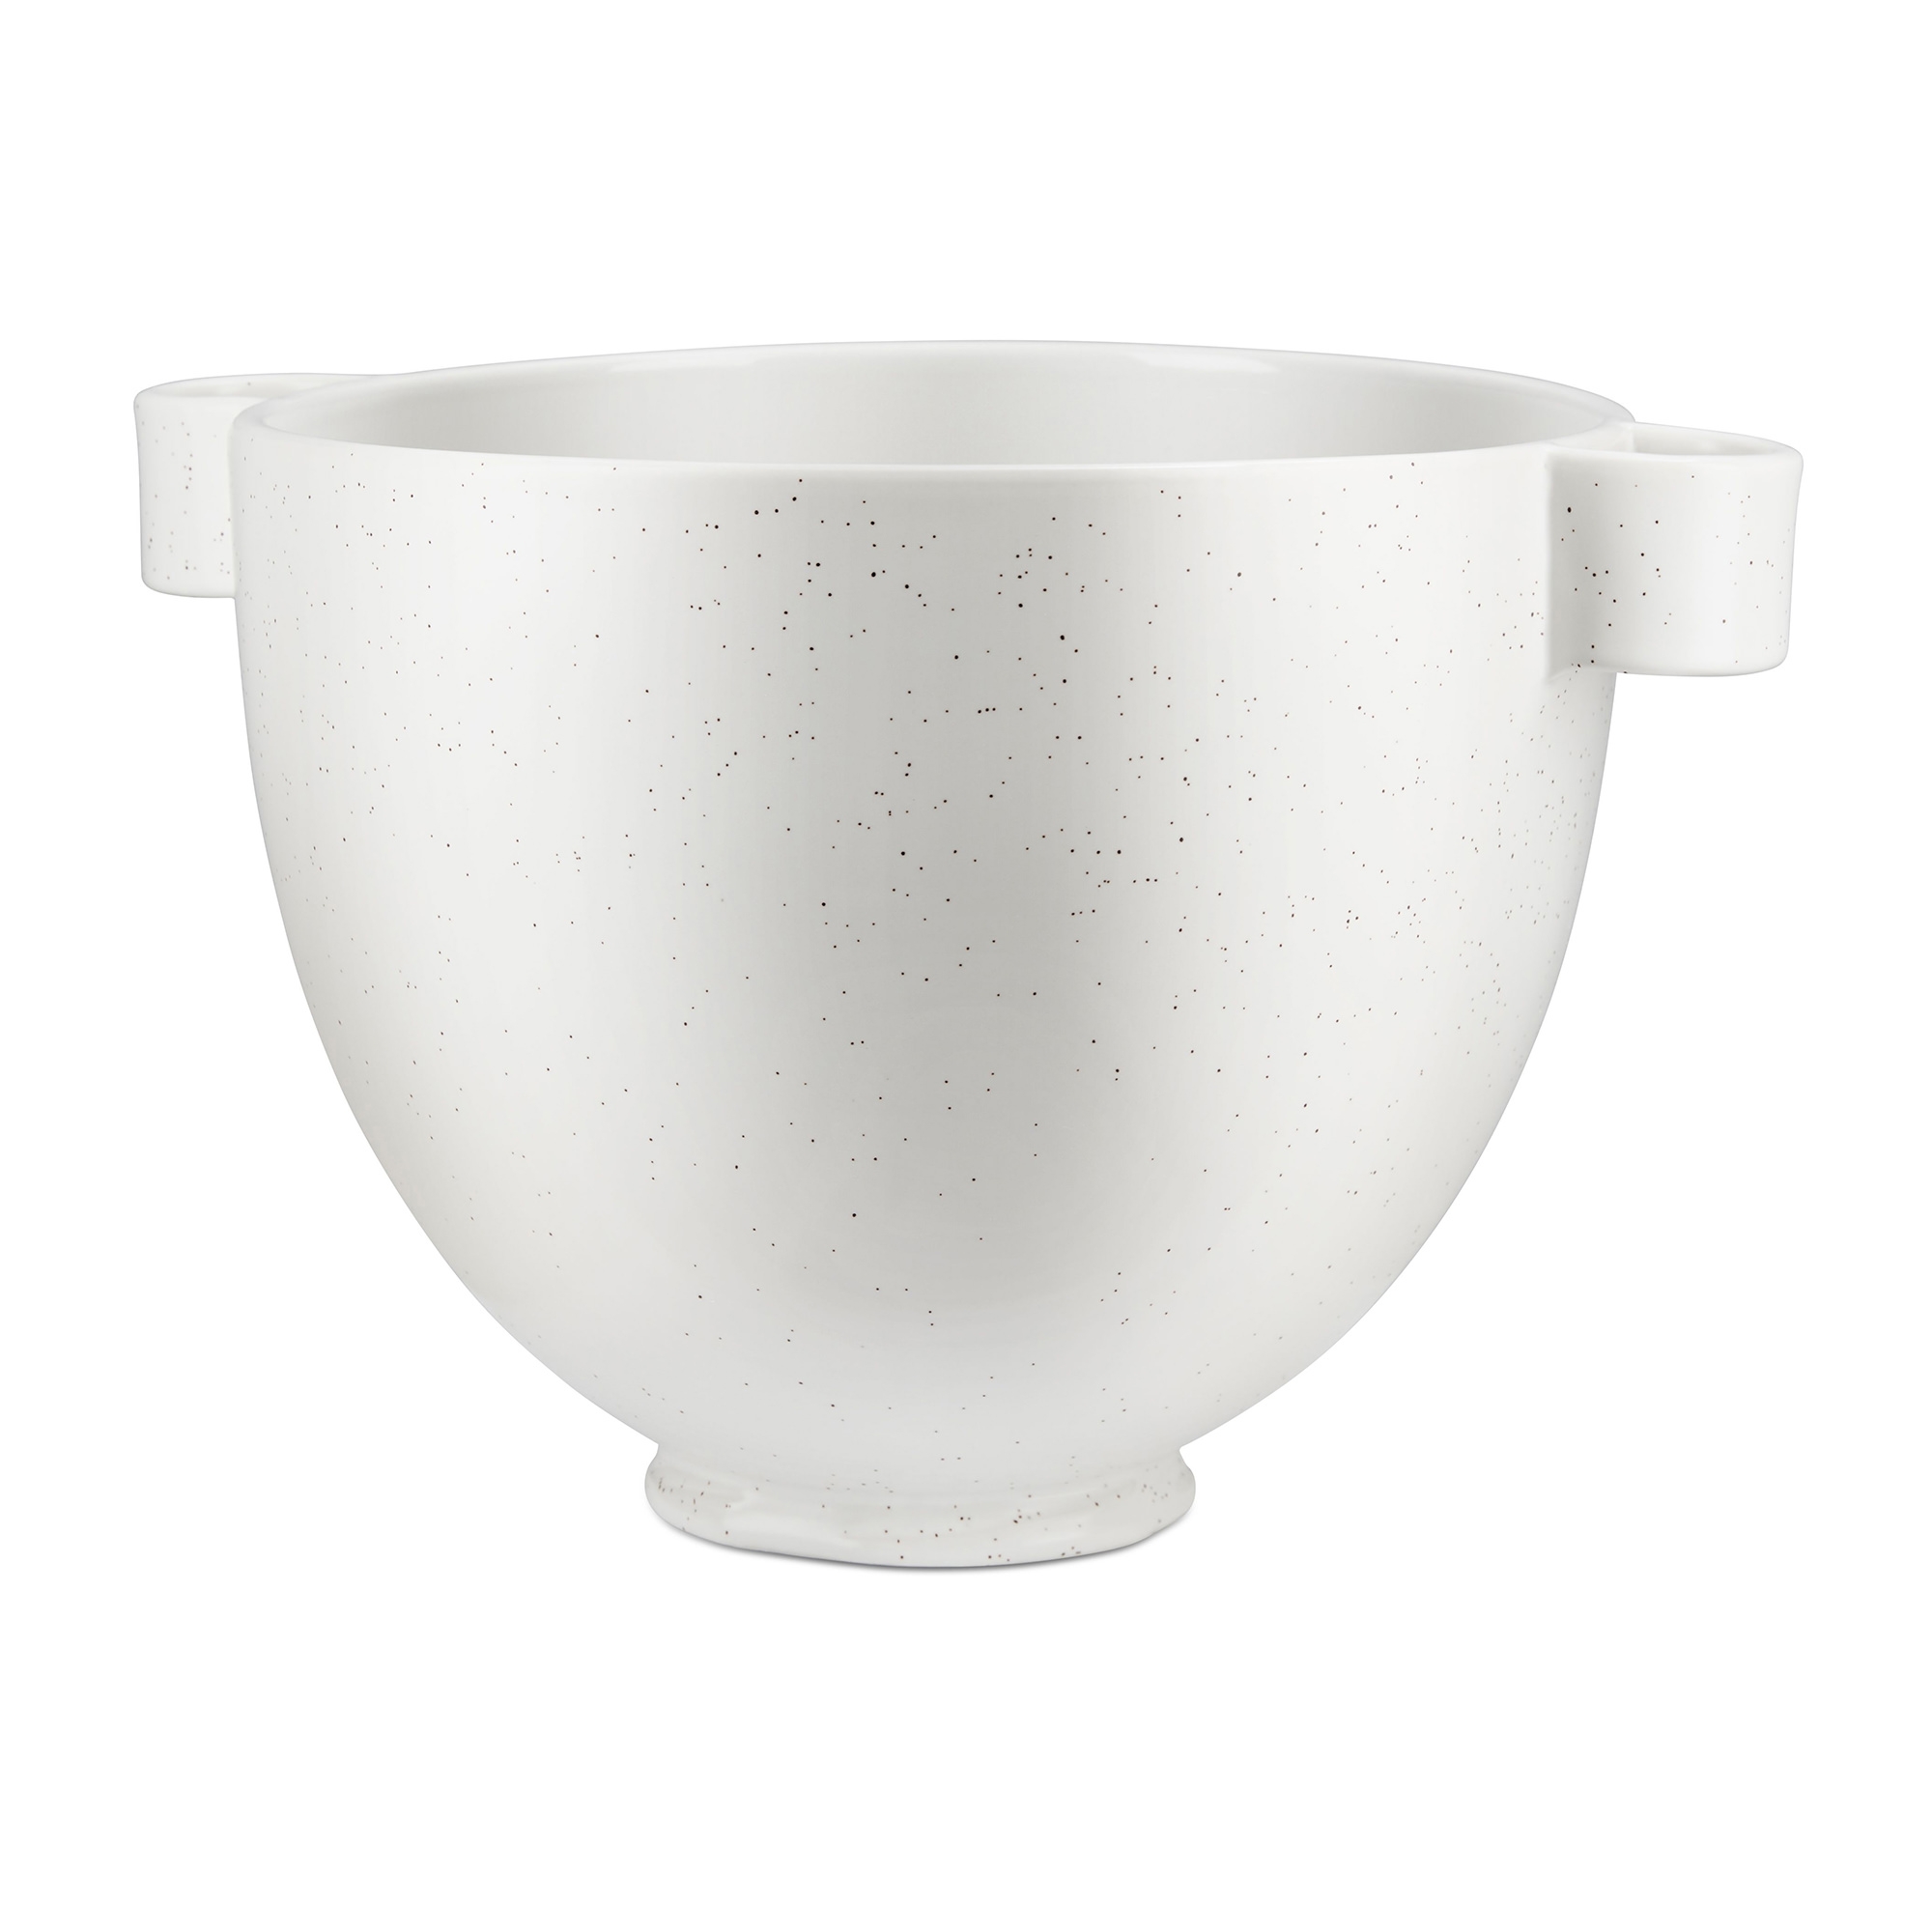 KitchenAid Ceramic Bowl for Stand Mixer 4.7L Speckled Stone Image 2